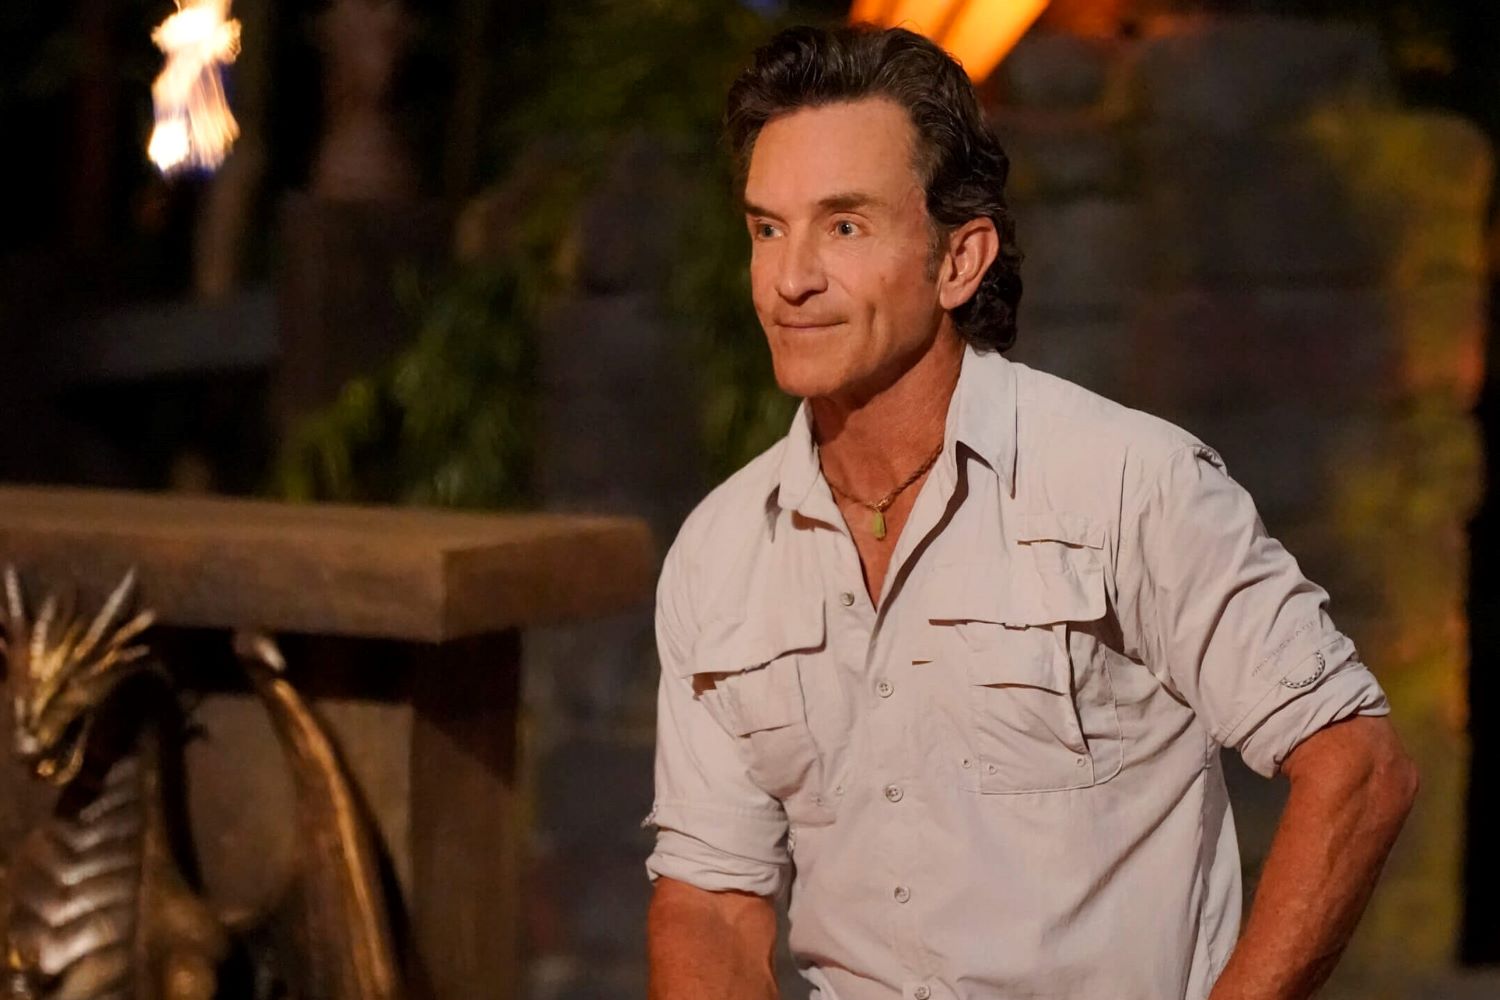 Jeff Probst, who hosts 'Survivor 44' and its finale on CBS, wears a light gray button-up shirt with rolled-up sleeves.